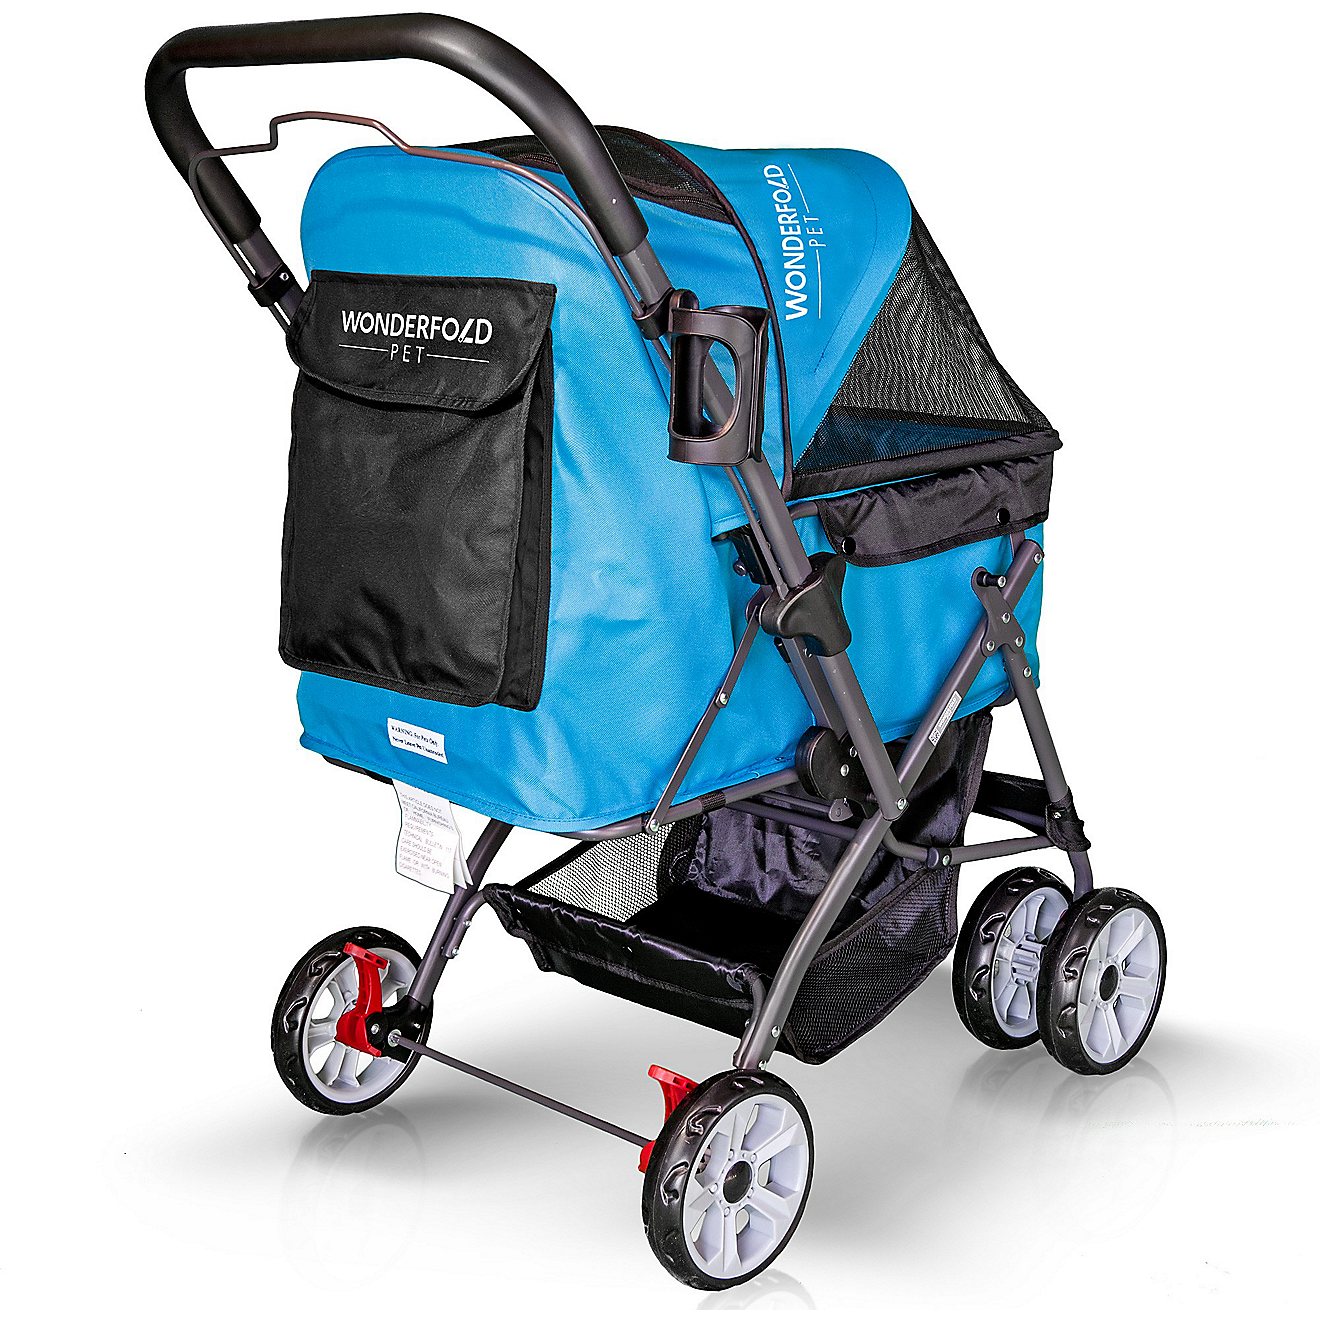 Wonderfold Wagon Folding Pet Stroller with Zipperless Entry and Reversible Handle                                                - view number 4